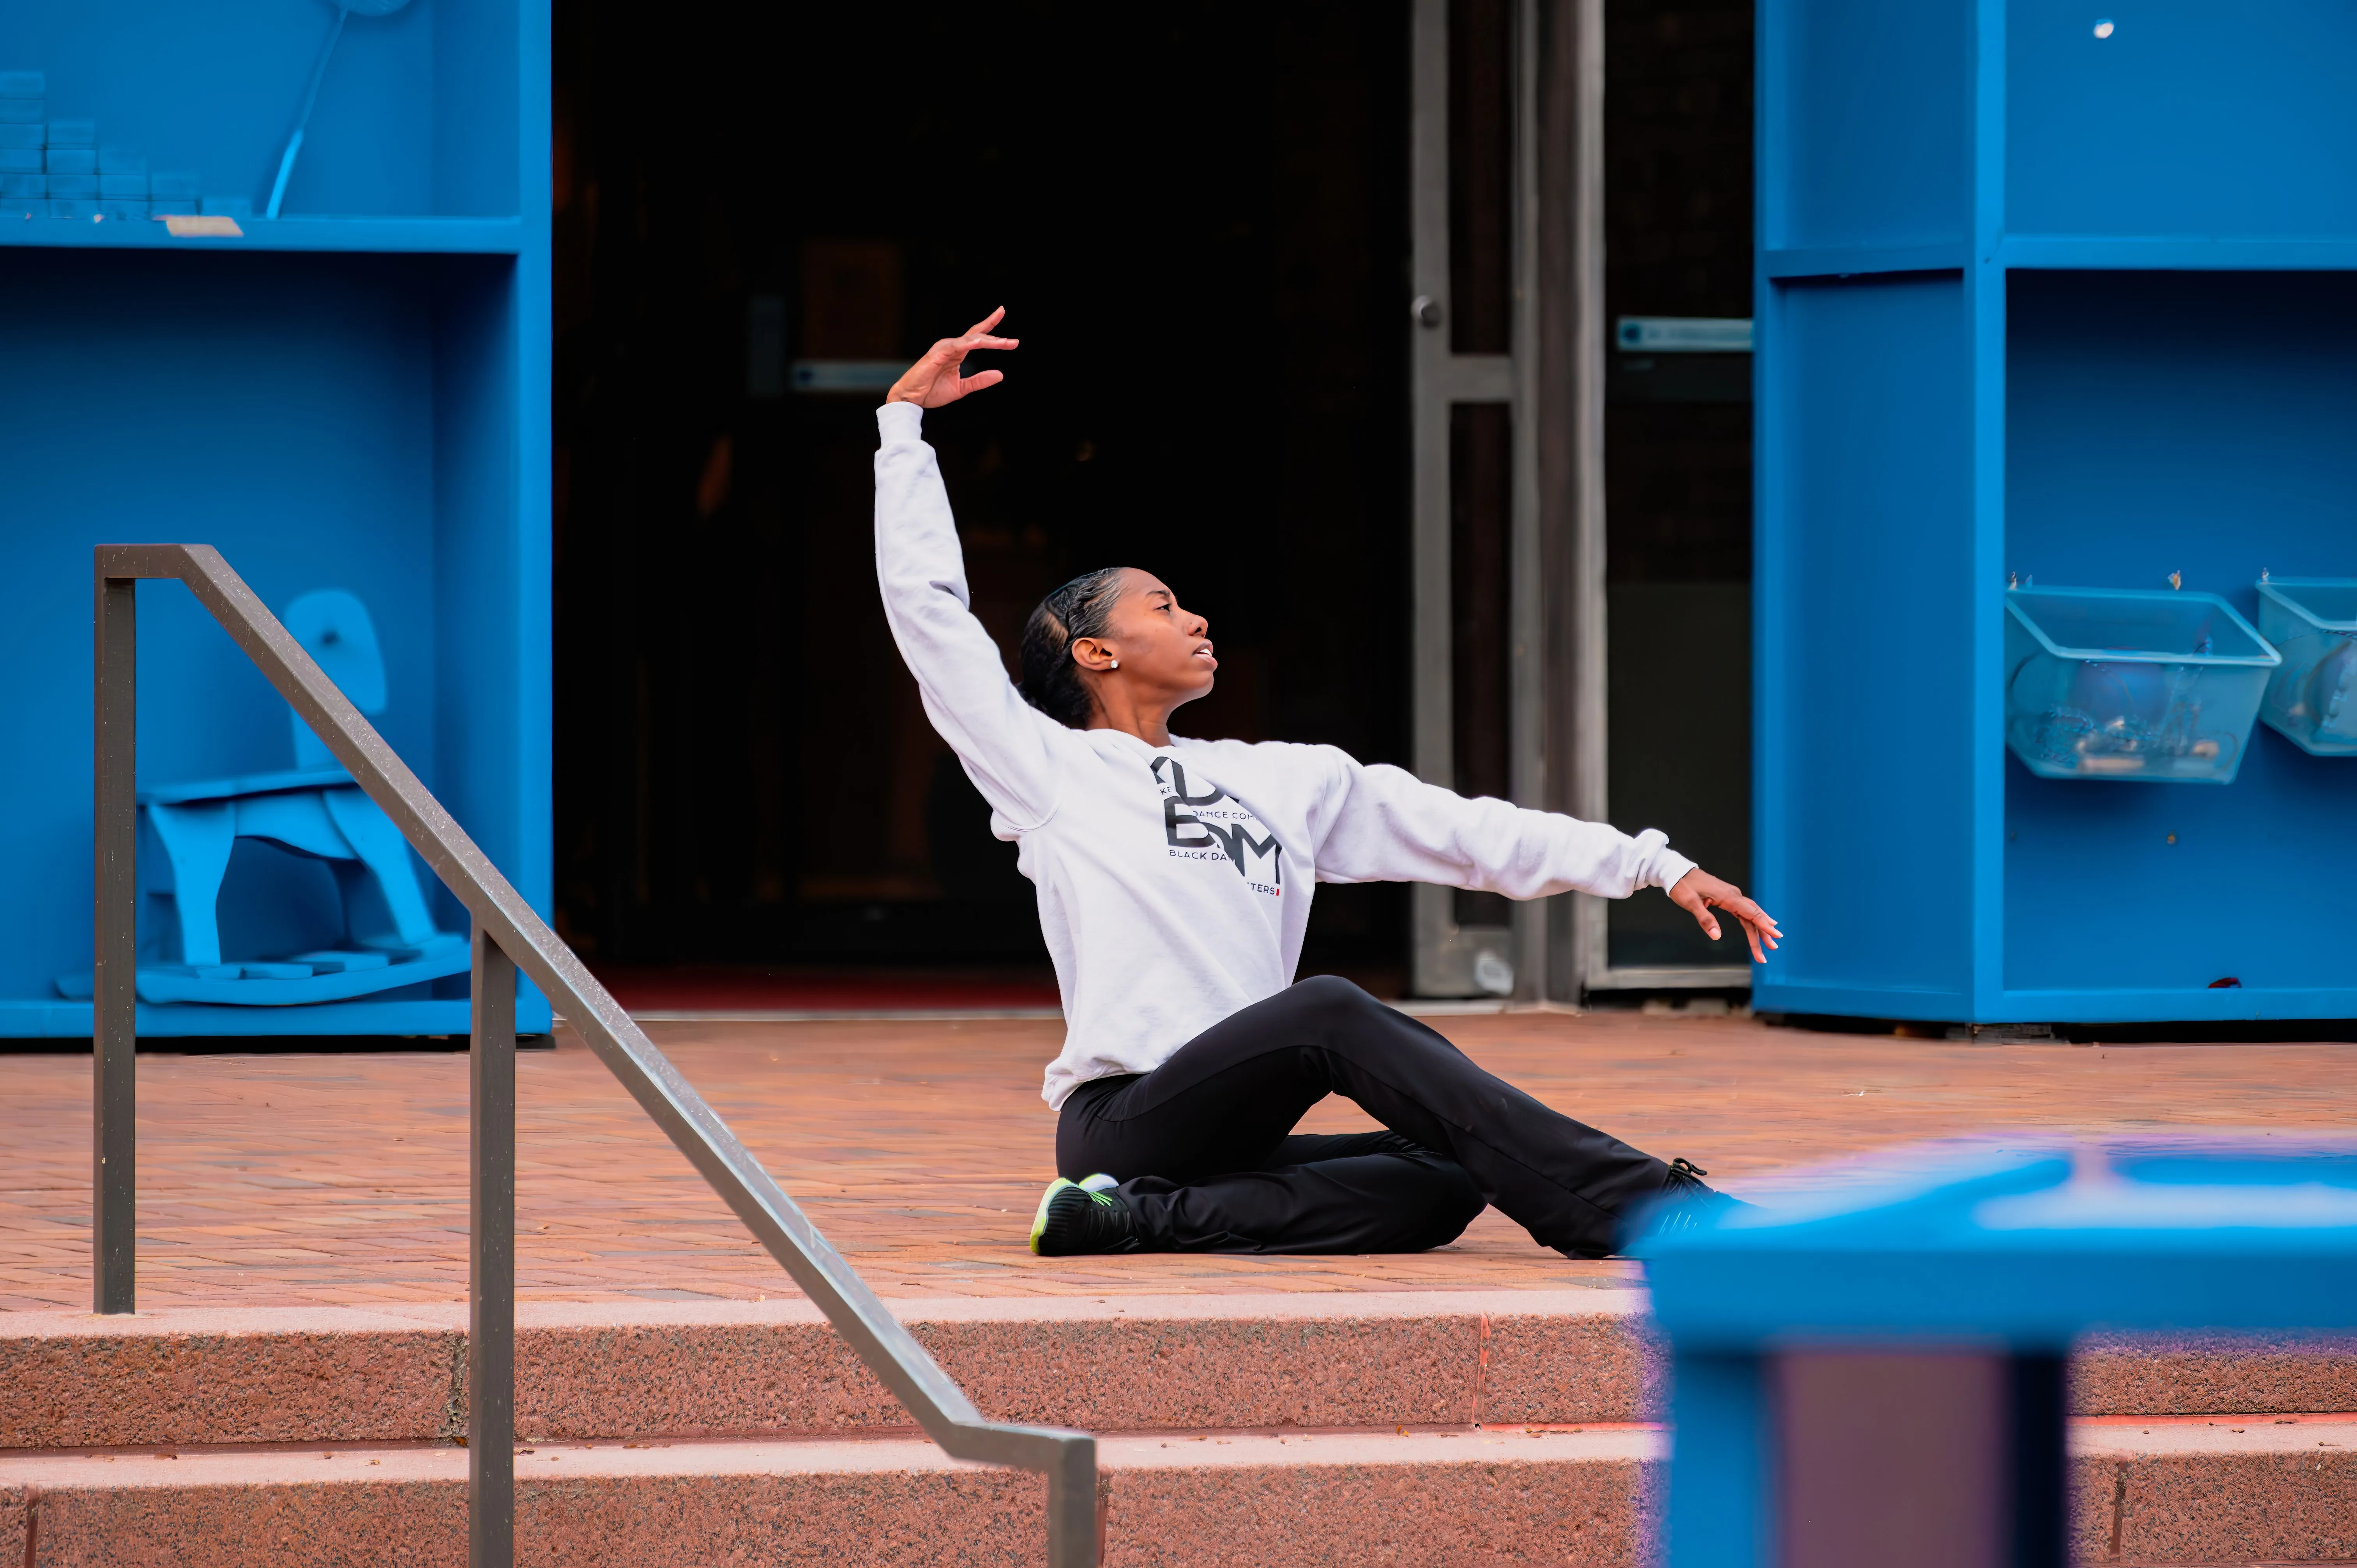 Person performing a dance move on outdoor stairs near a blue building.